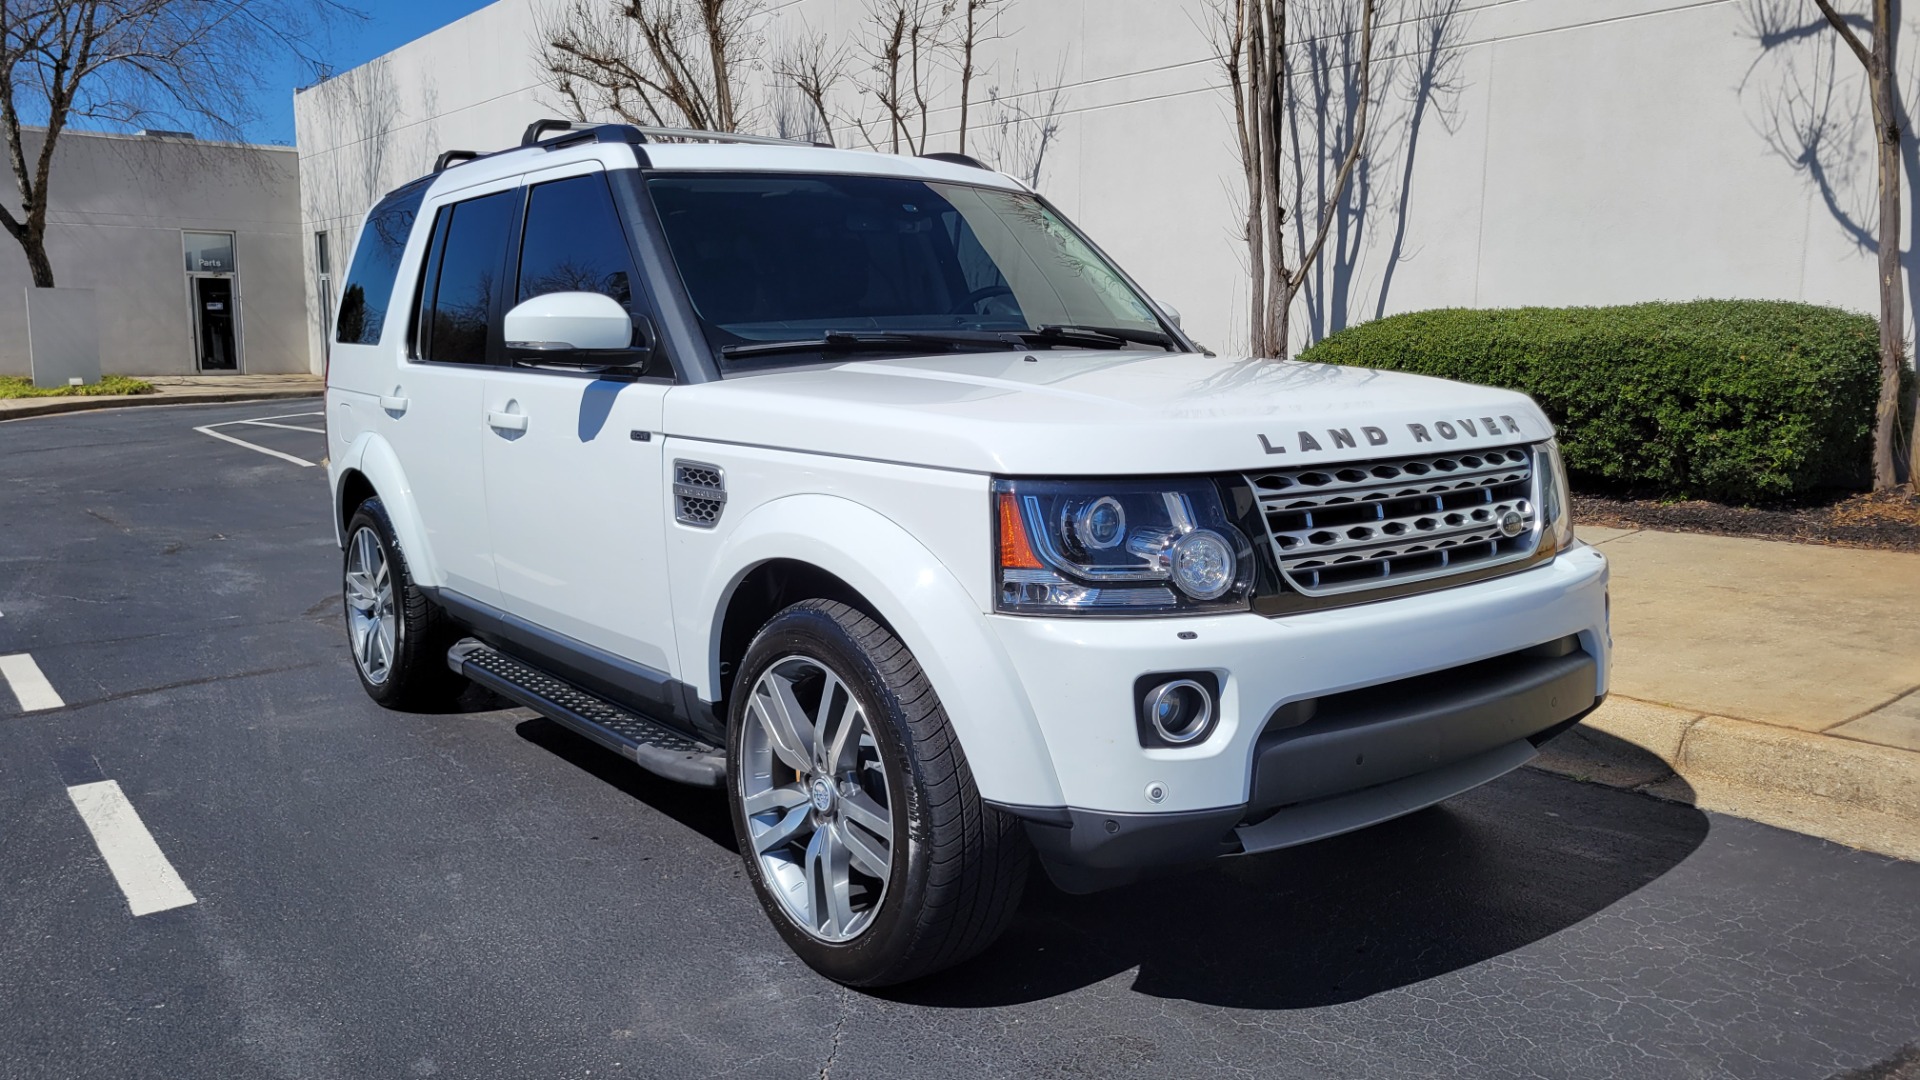 Used 2014 Land Rover LR4 HSE LUX / NAV / SUNROOF / 3-ROW / MERIDIAN / VISION ASST for sale Sold at Formula Imports in Charlotte NC 28227 6